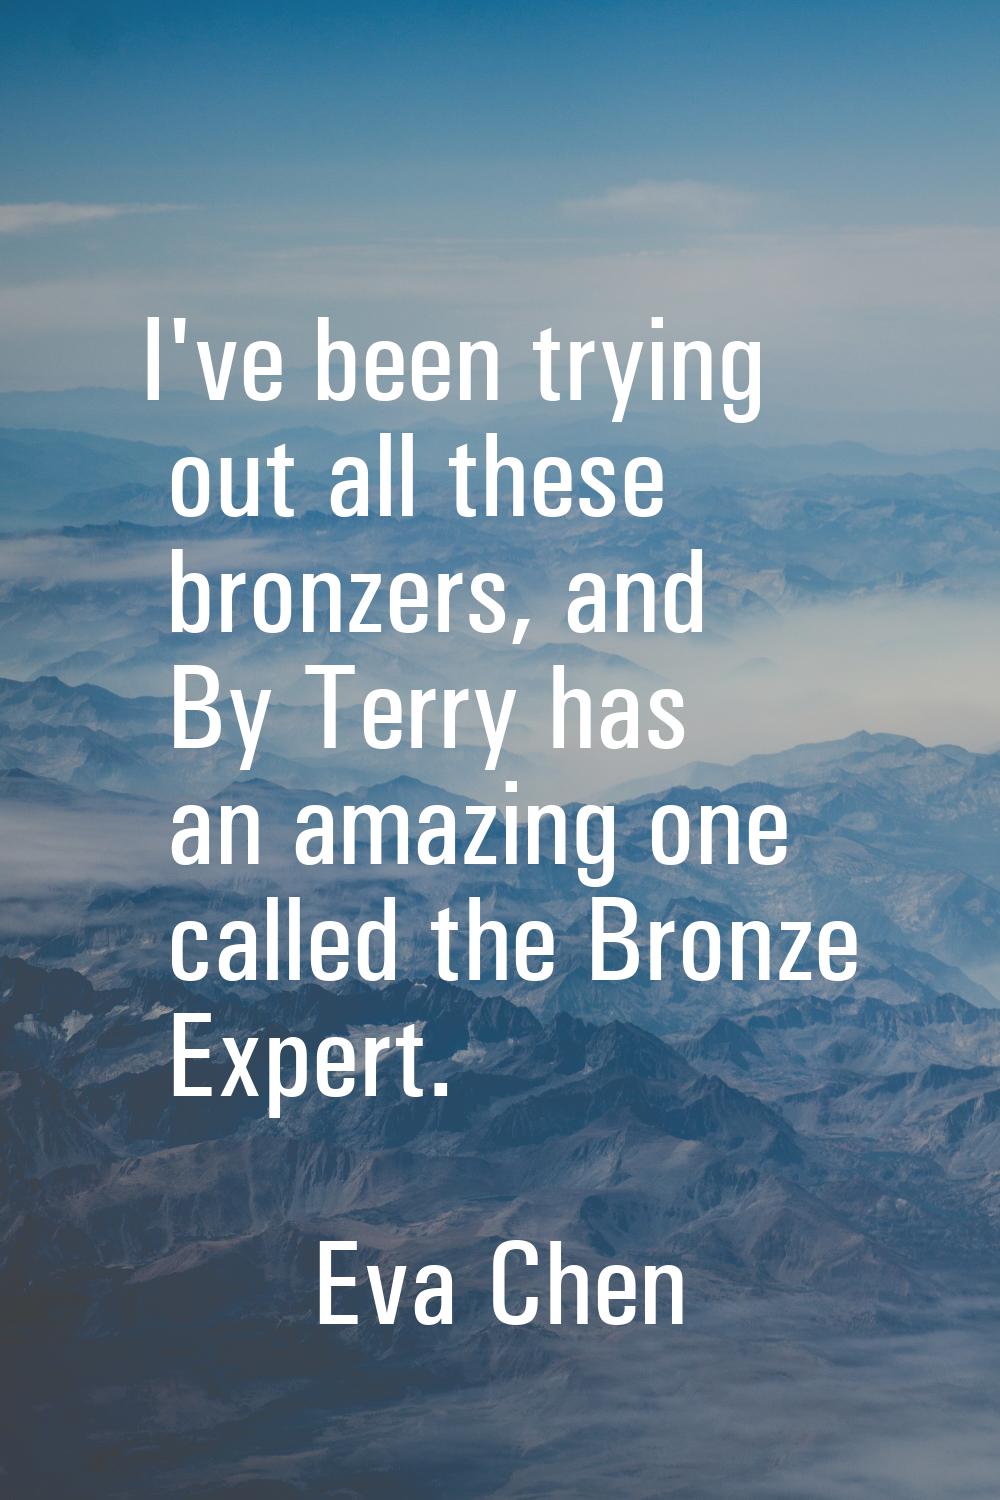 I've been trying out all these bronzers, and By Terry has an amazing one called the Bronze Expert.